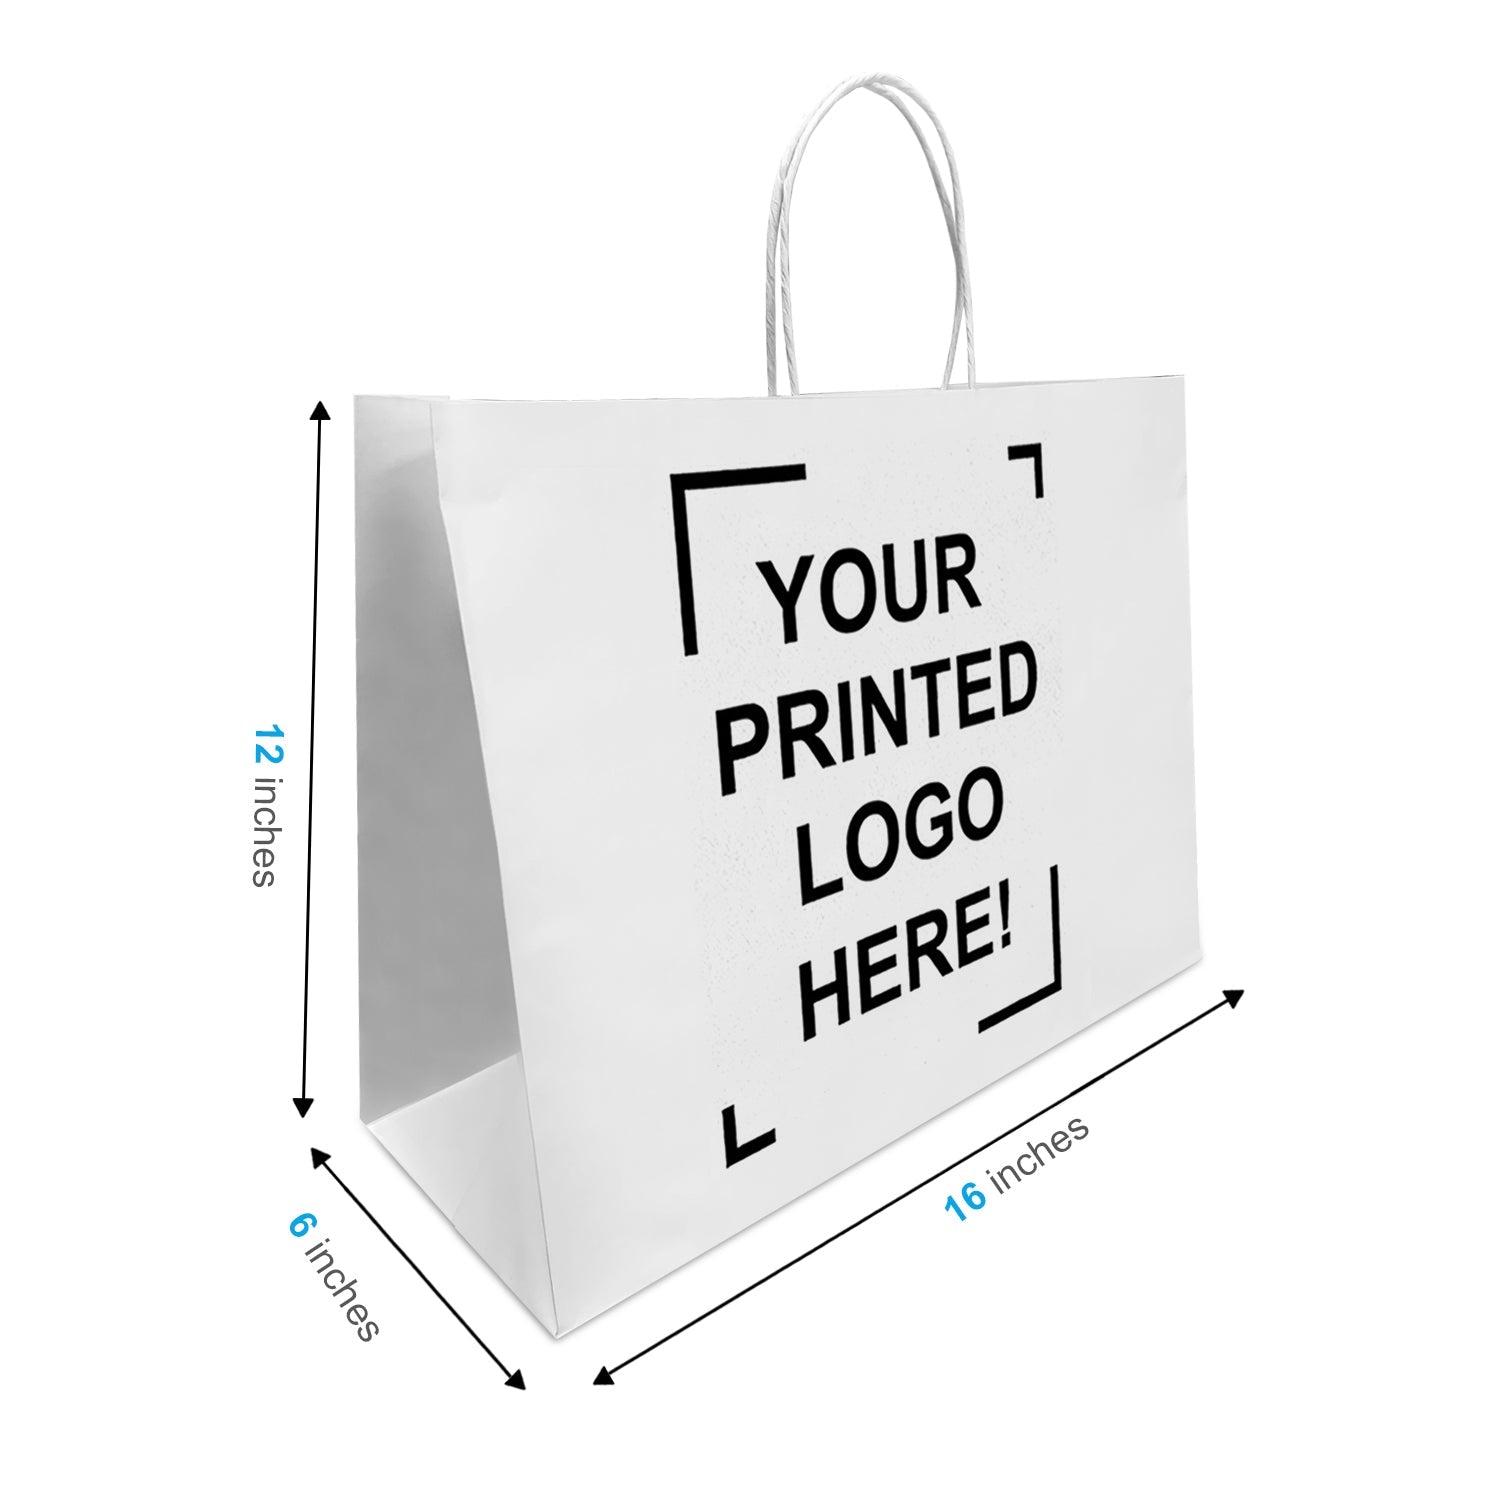 250 Pcs, Vogue, 16x6x12 inches, White Paper Bags, with Twisted Handle, Full Color Custom Print